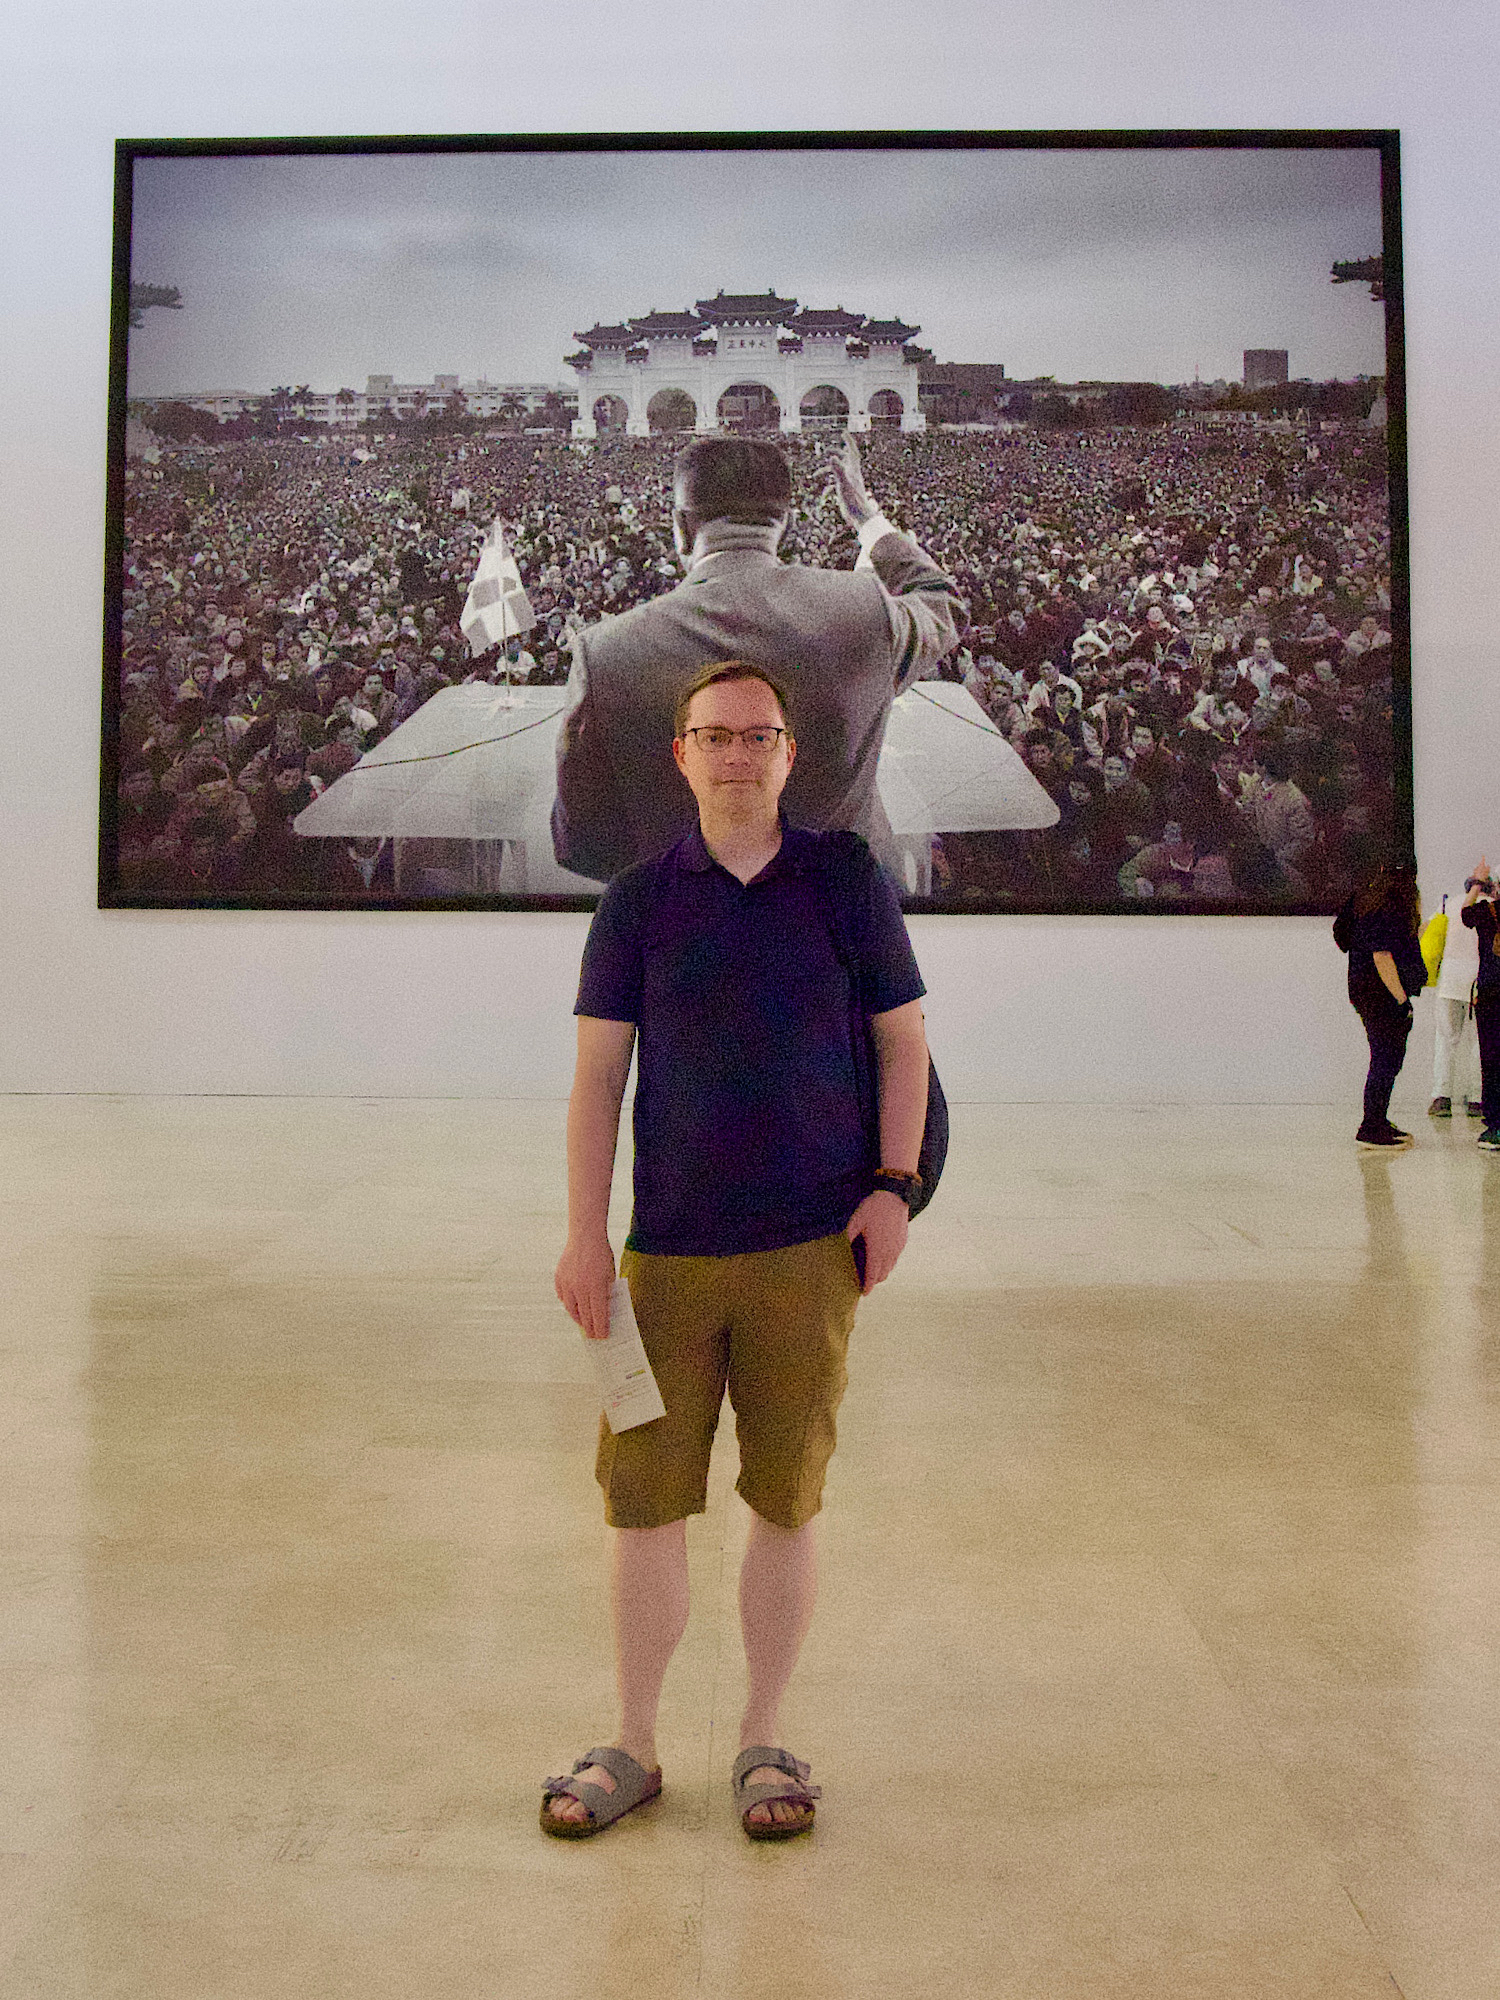 Chad standing in front of an epic and very large photo of a 1990 pro-democracy protest image of a speaker from behind exhorting a crowd of students 